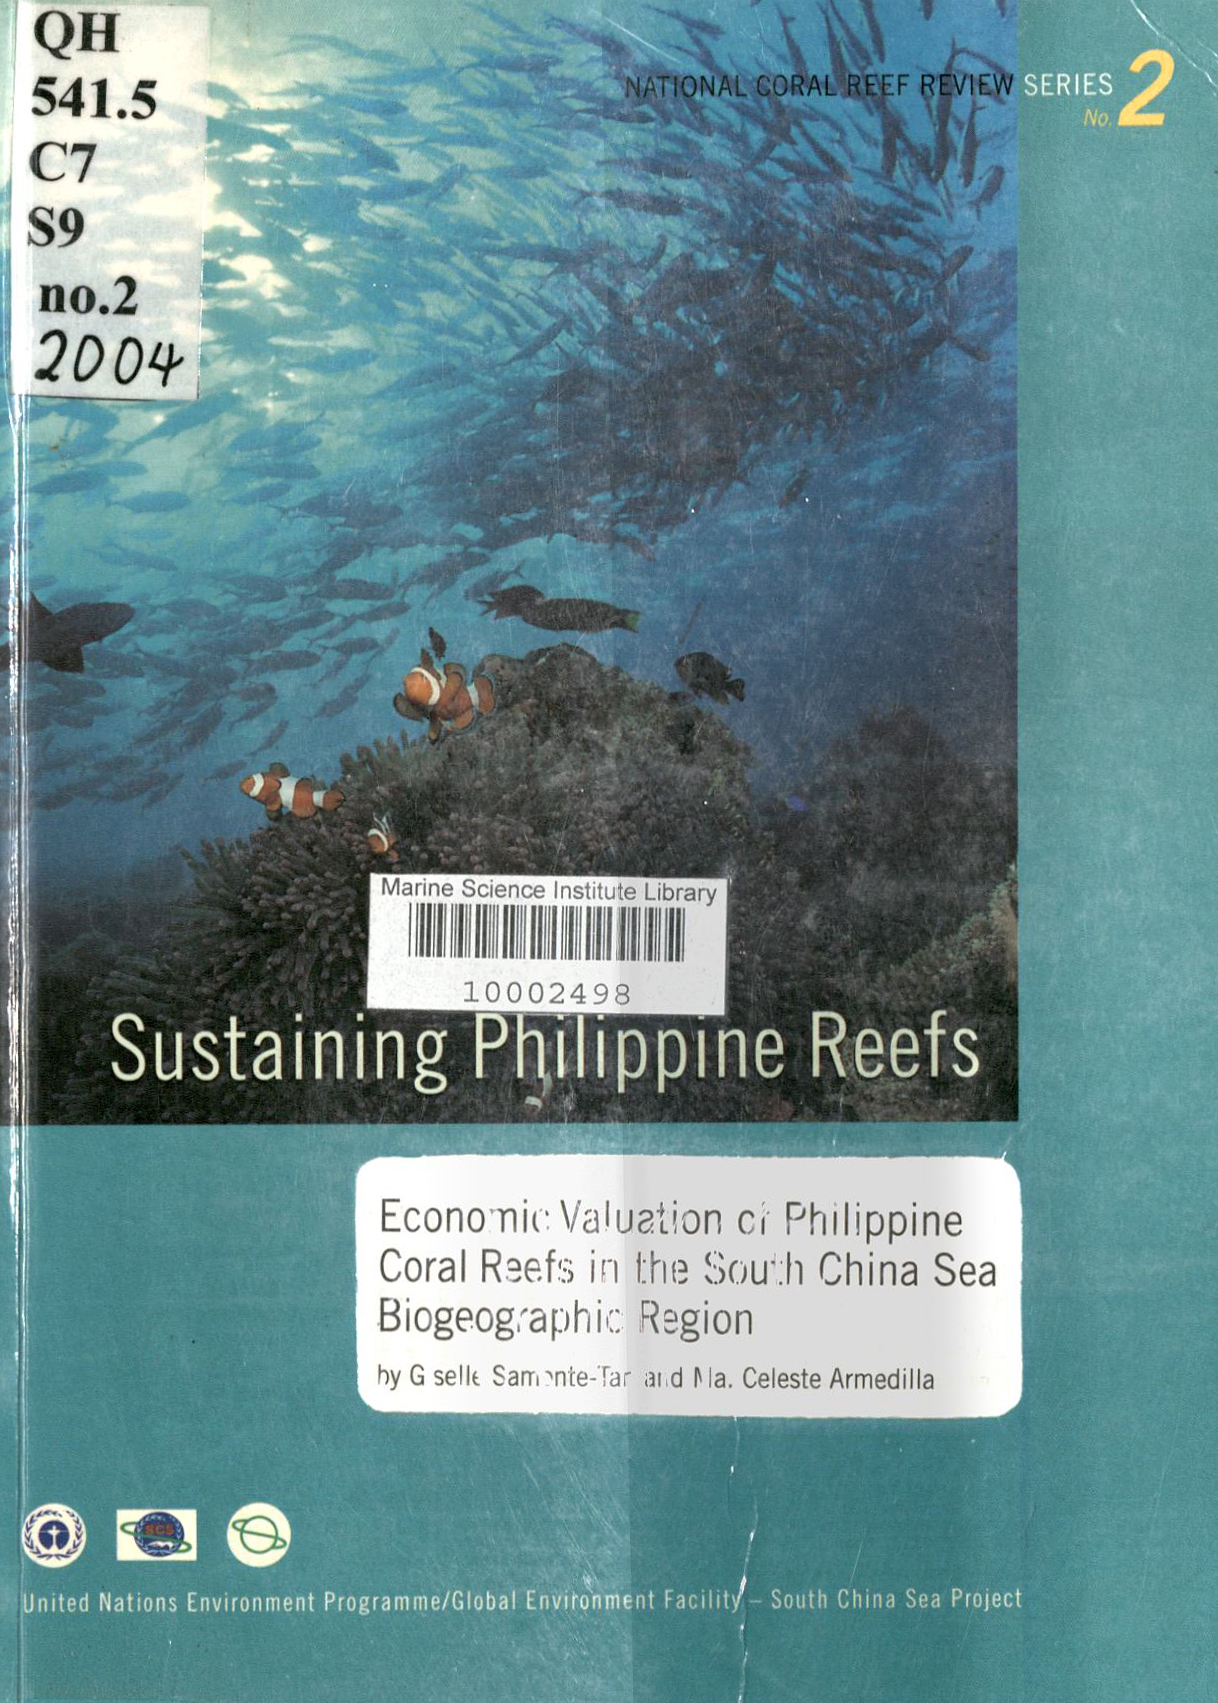 Sustaining Philippine Reefs National Coral Reef Review Series no.1 : Policy and Legal Framework for Philippine Coral Reefs and Integrated Coastal Management